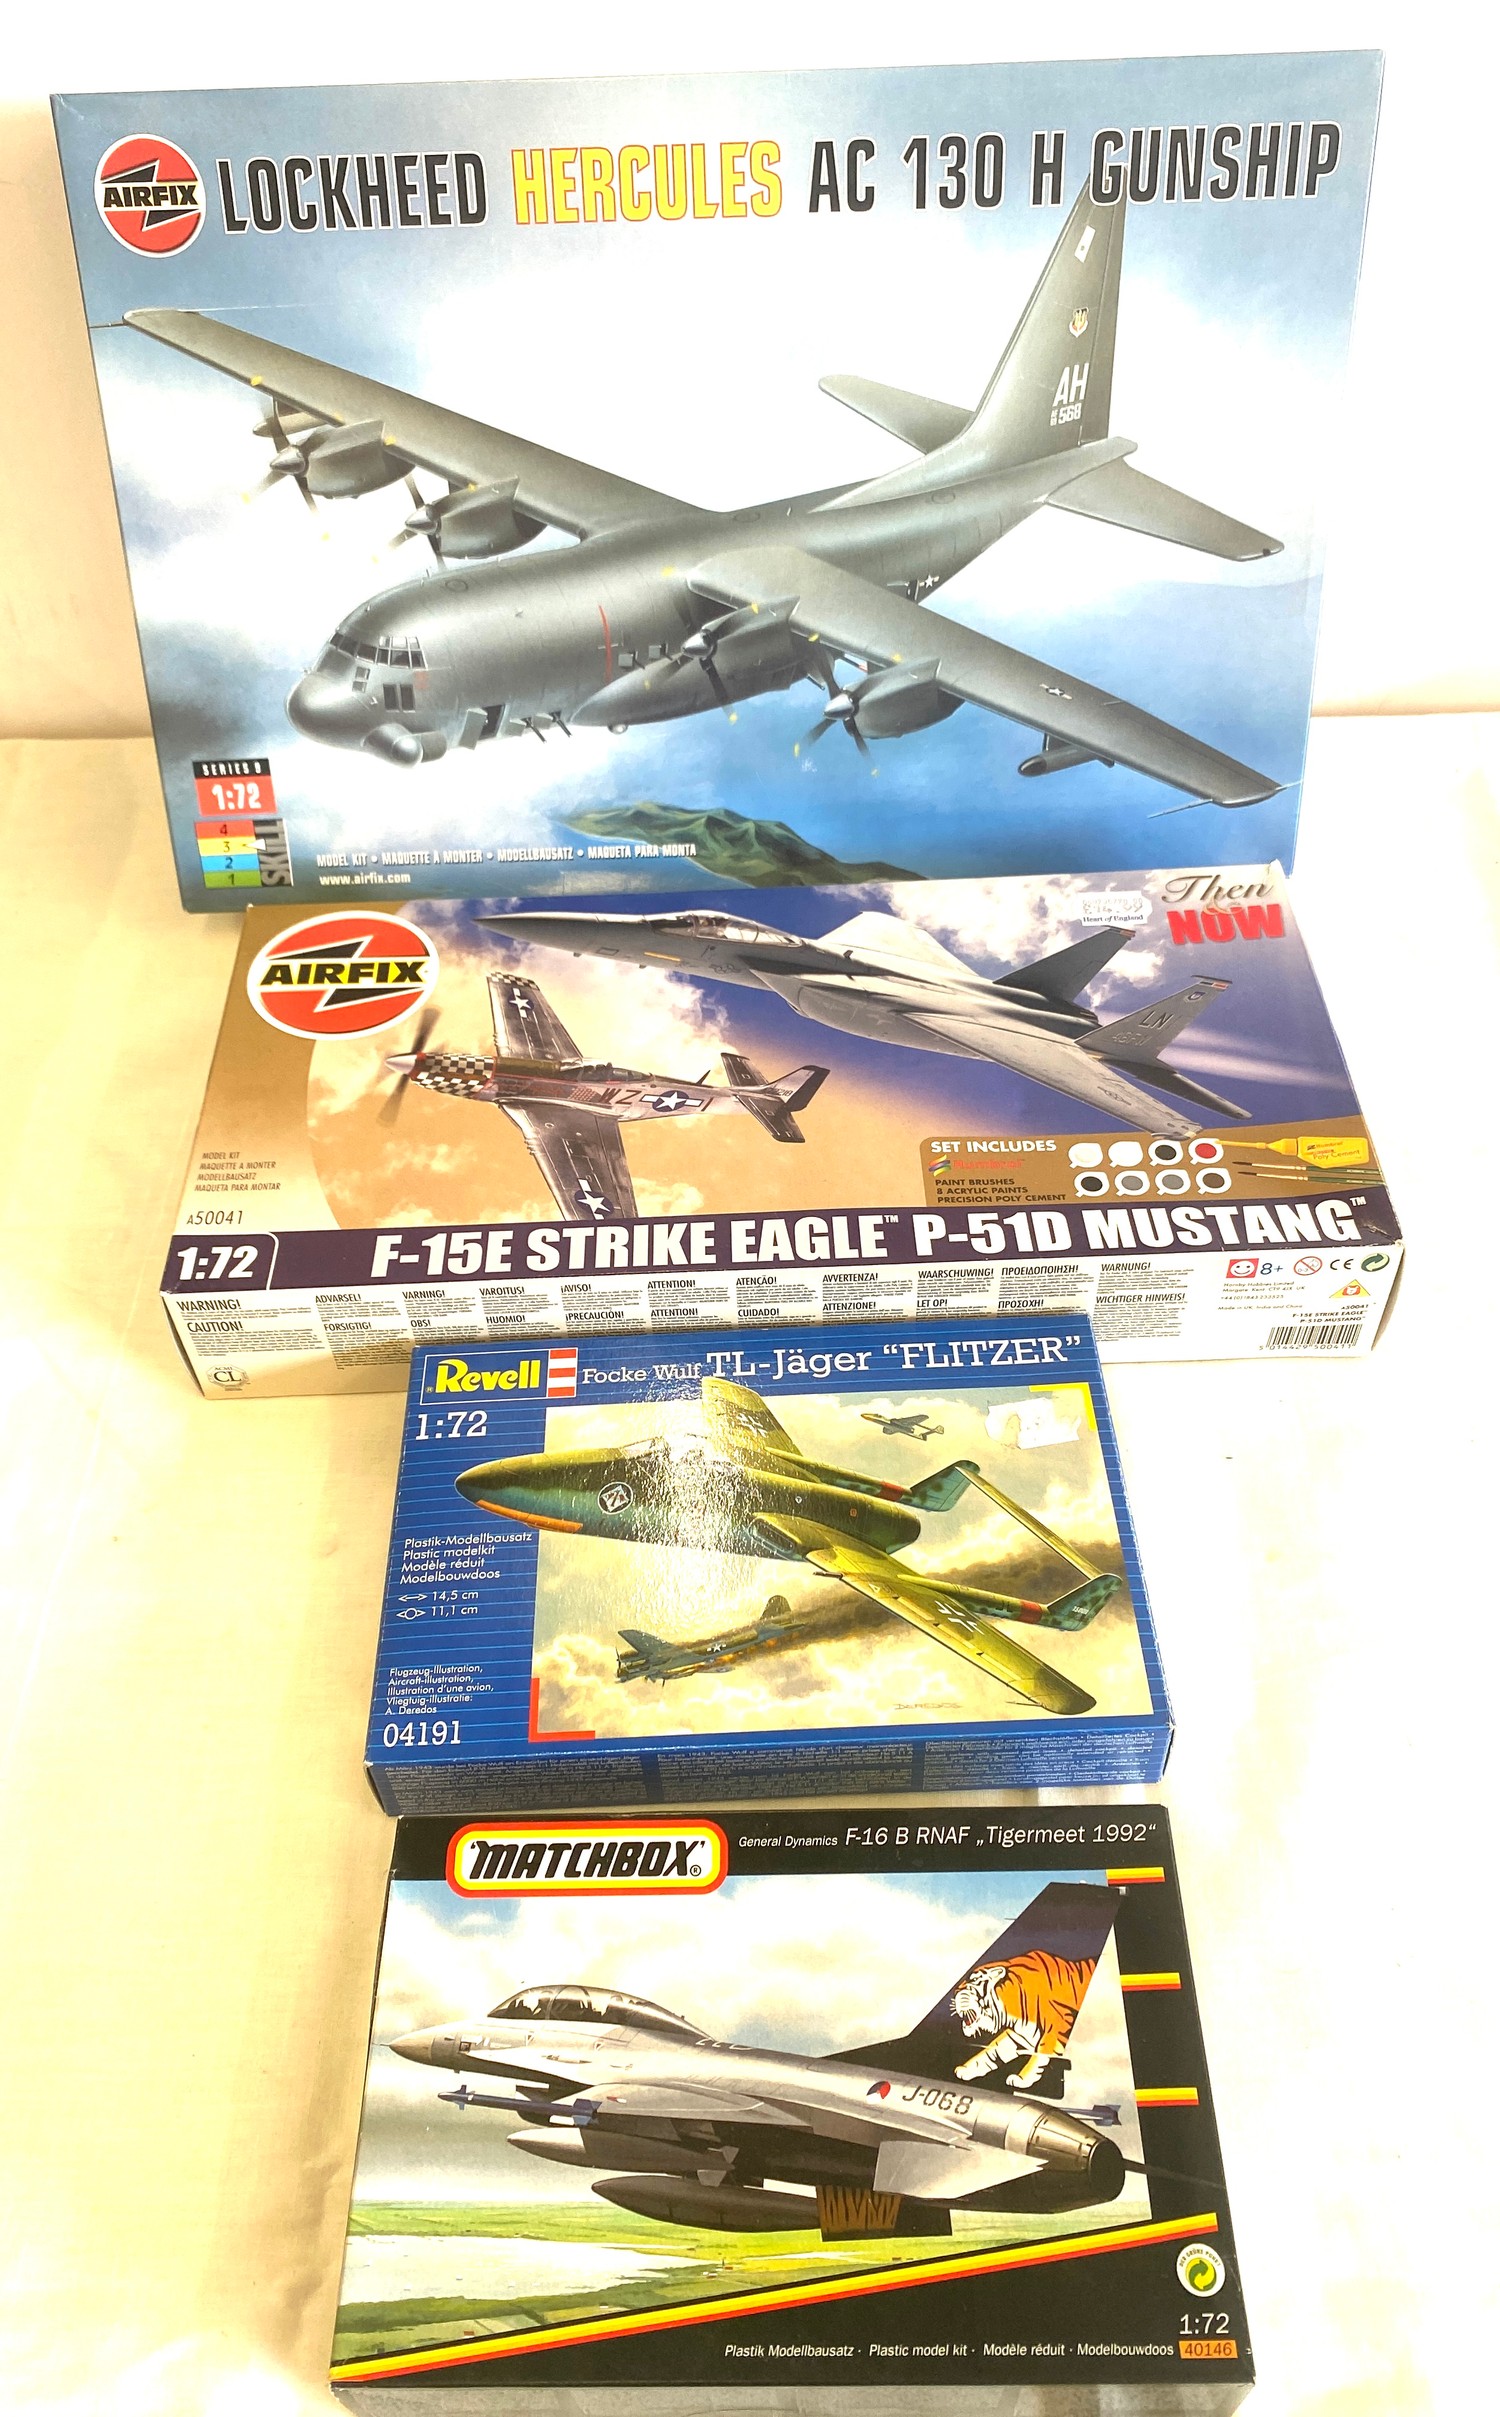 Selection of 4 boxed model air crafts includes, Airfix Lockheed Hercules AC 130 H Gunship, Matchboox